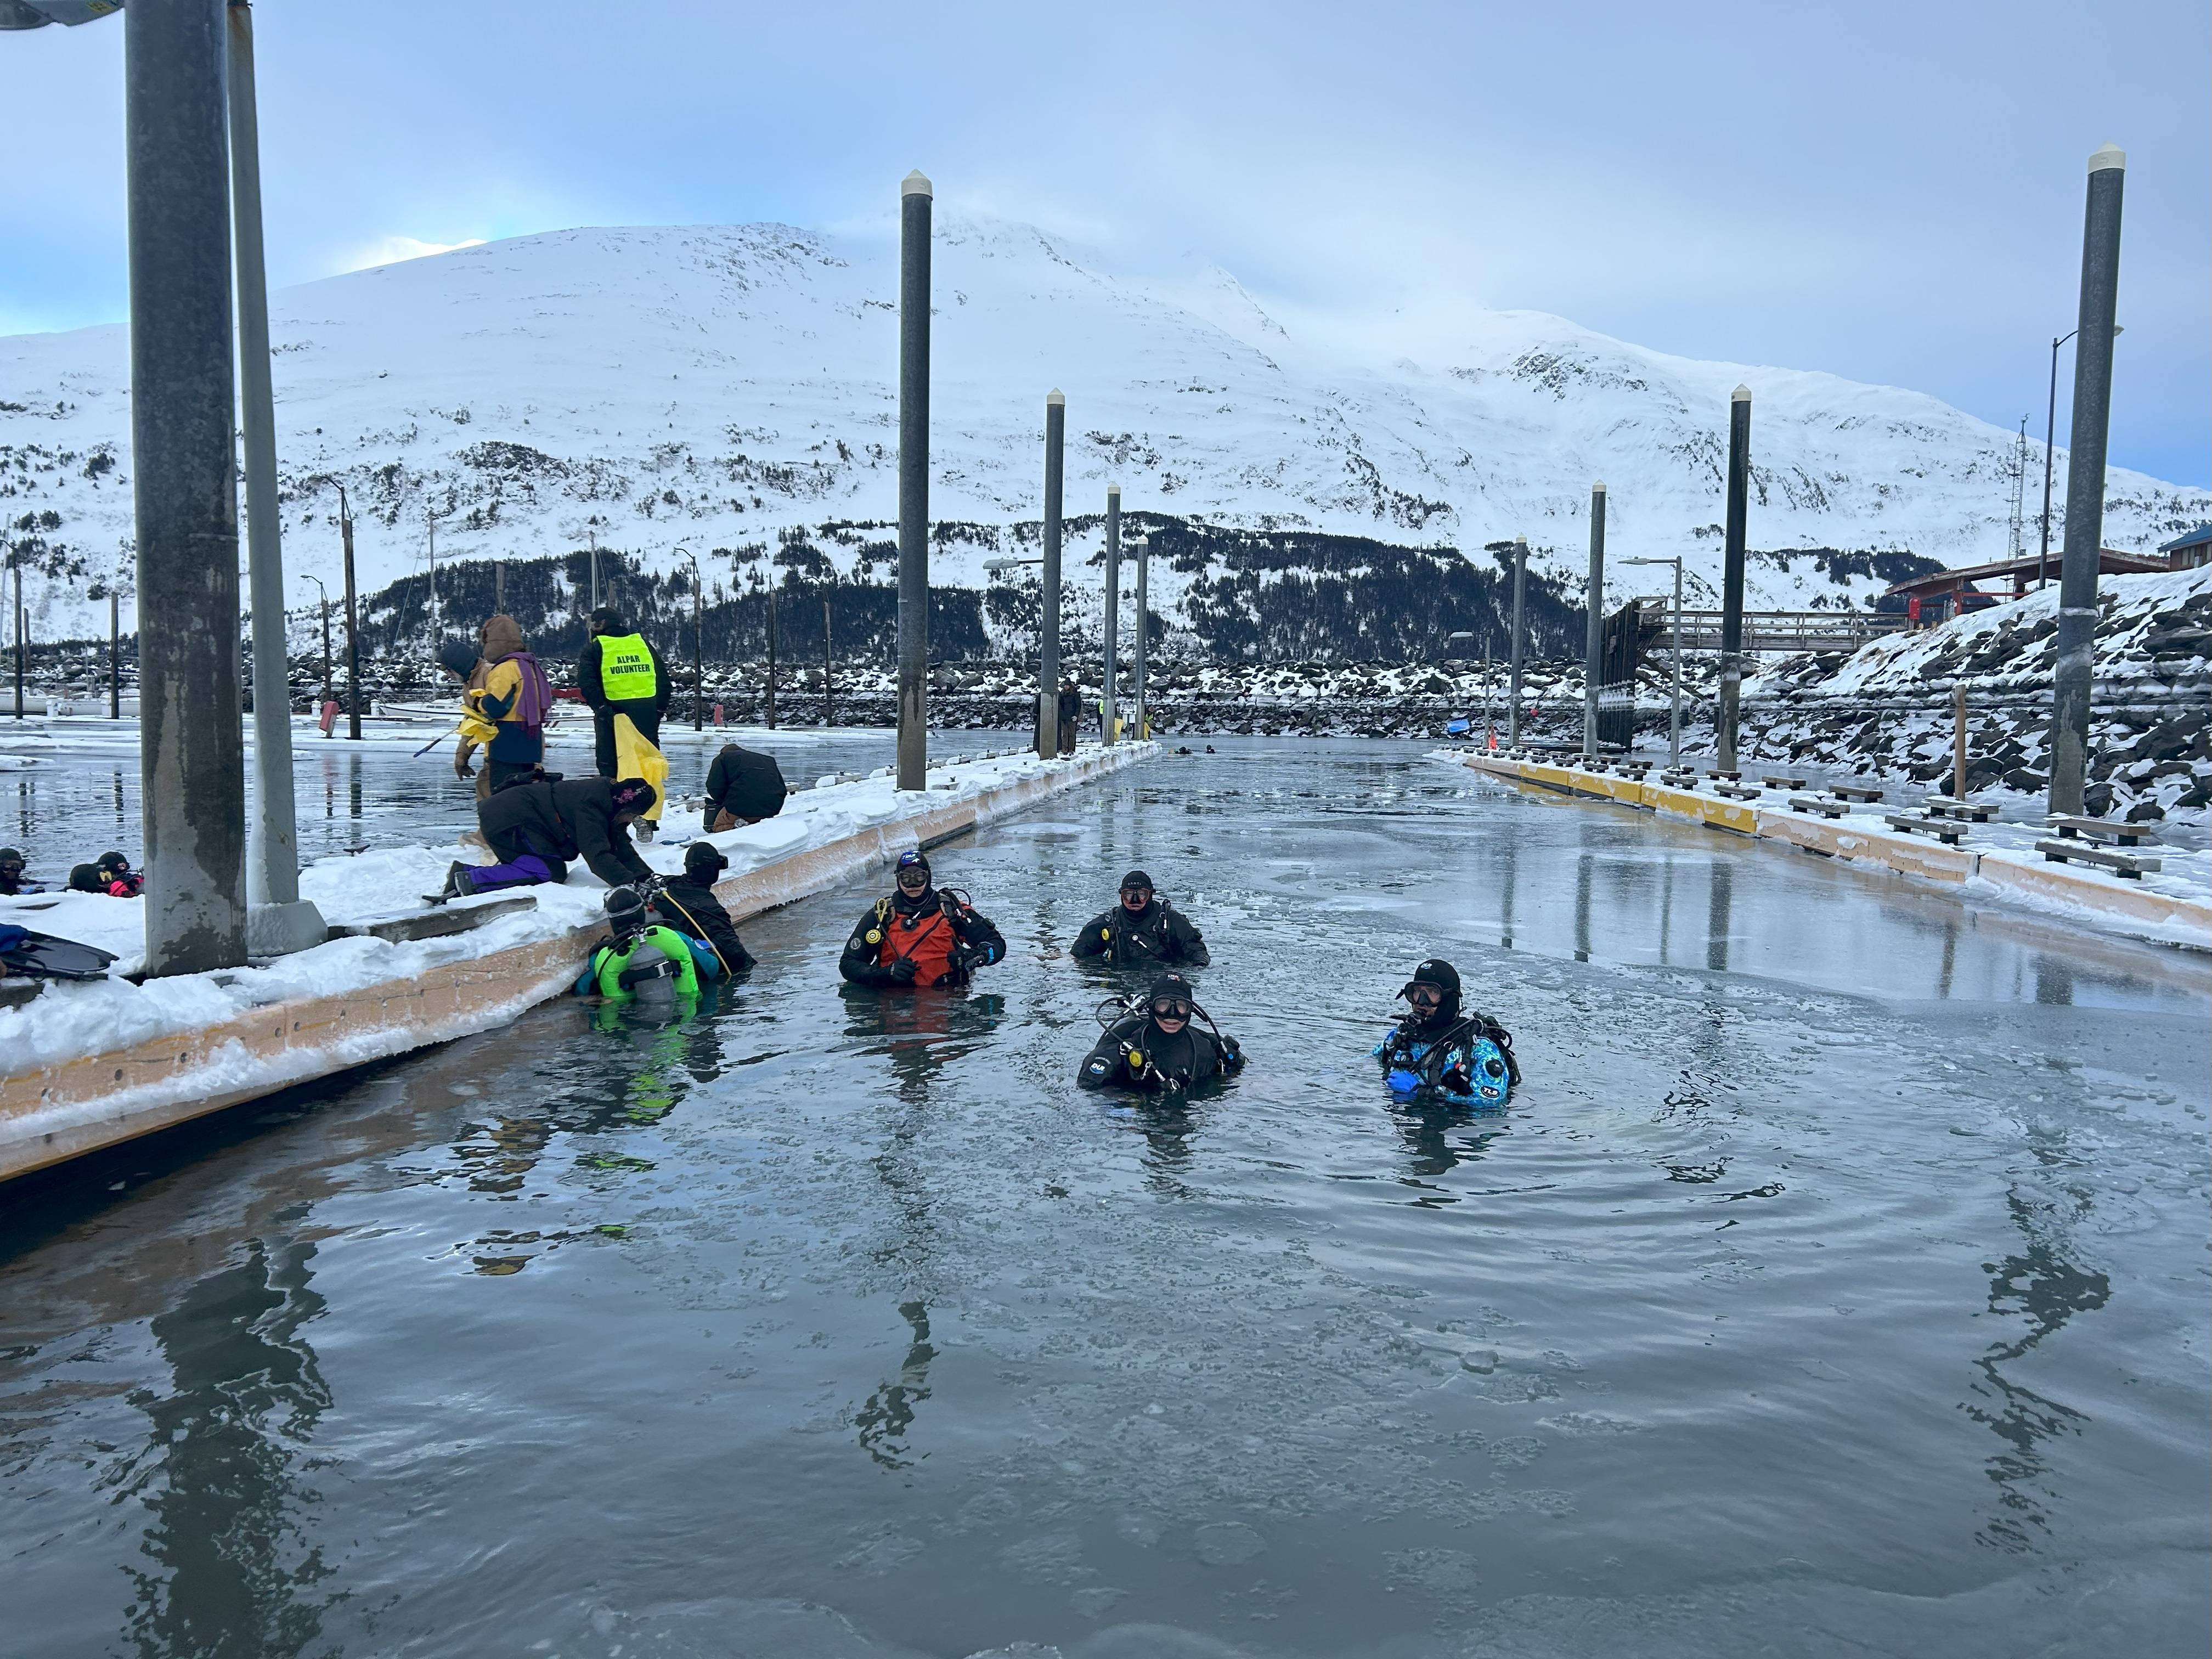 Divers stand in frigid Whittier Harbor waters with a snow capped mountain in the background.